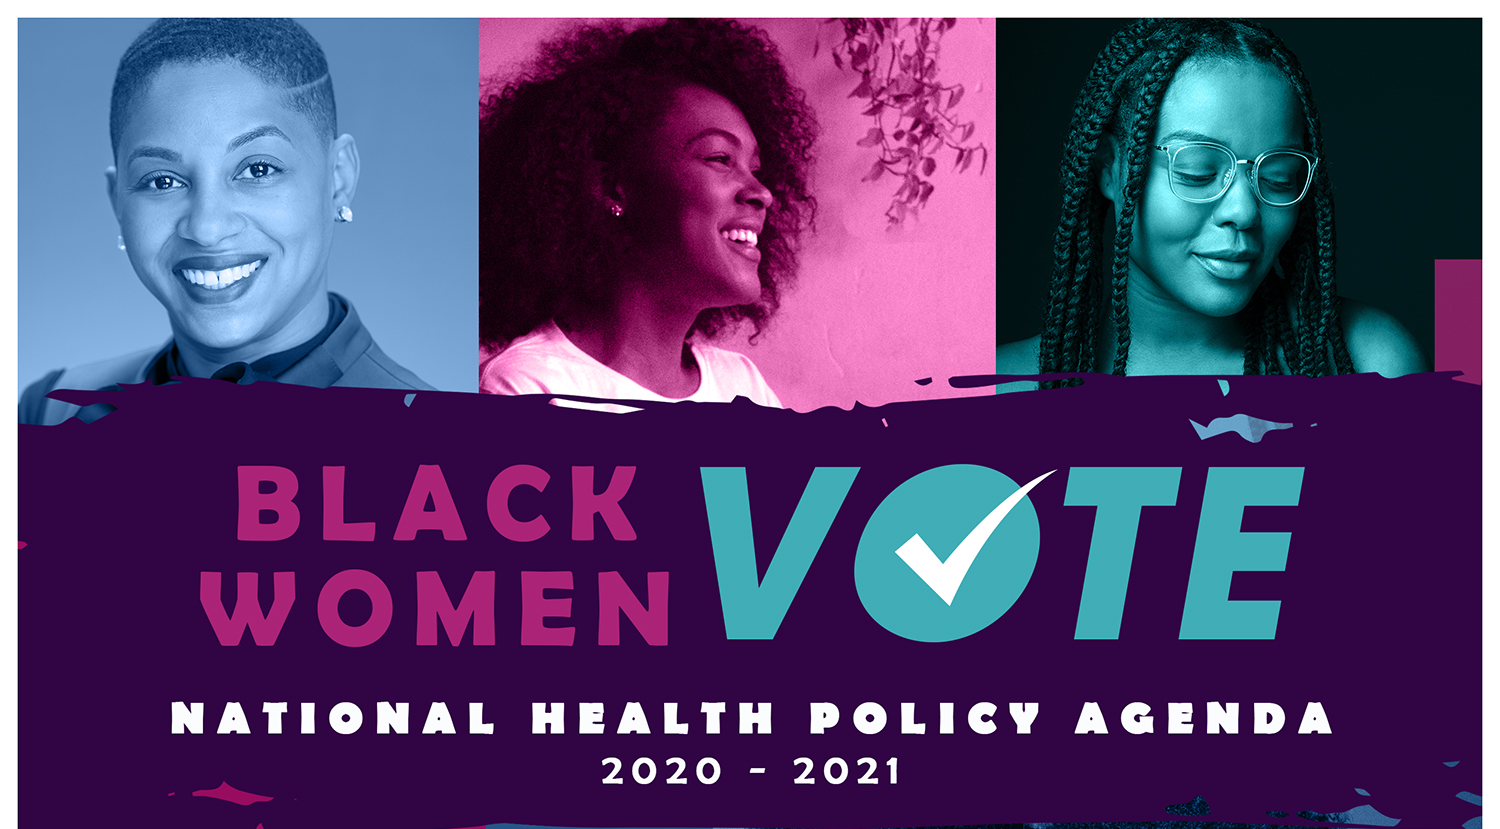 Black Women’s Health Imperative Releases National Health Policy Agenda